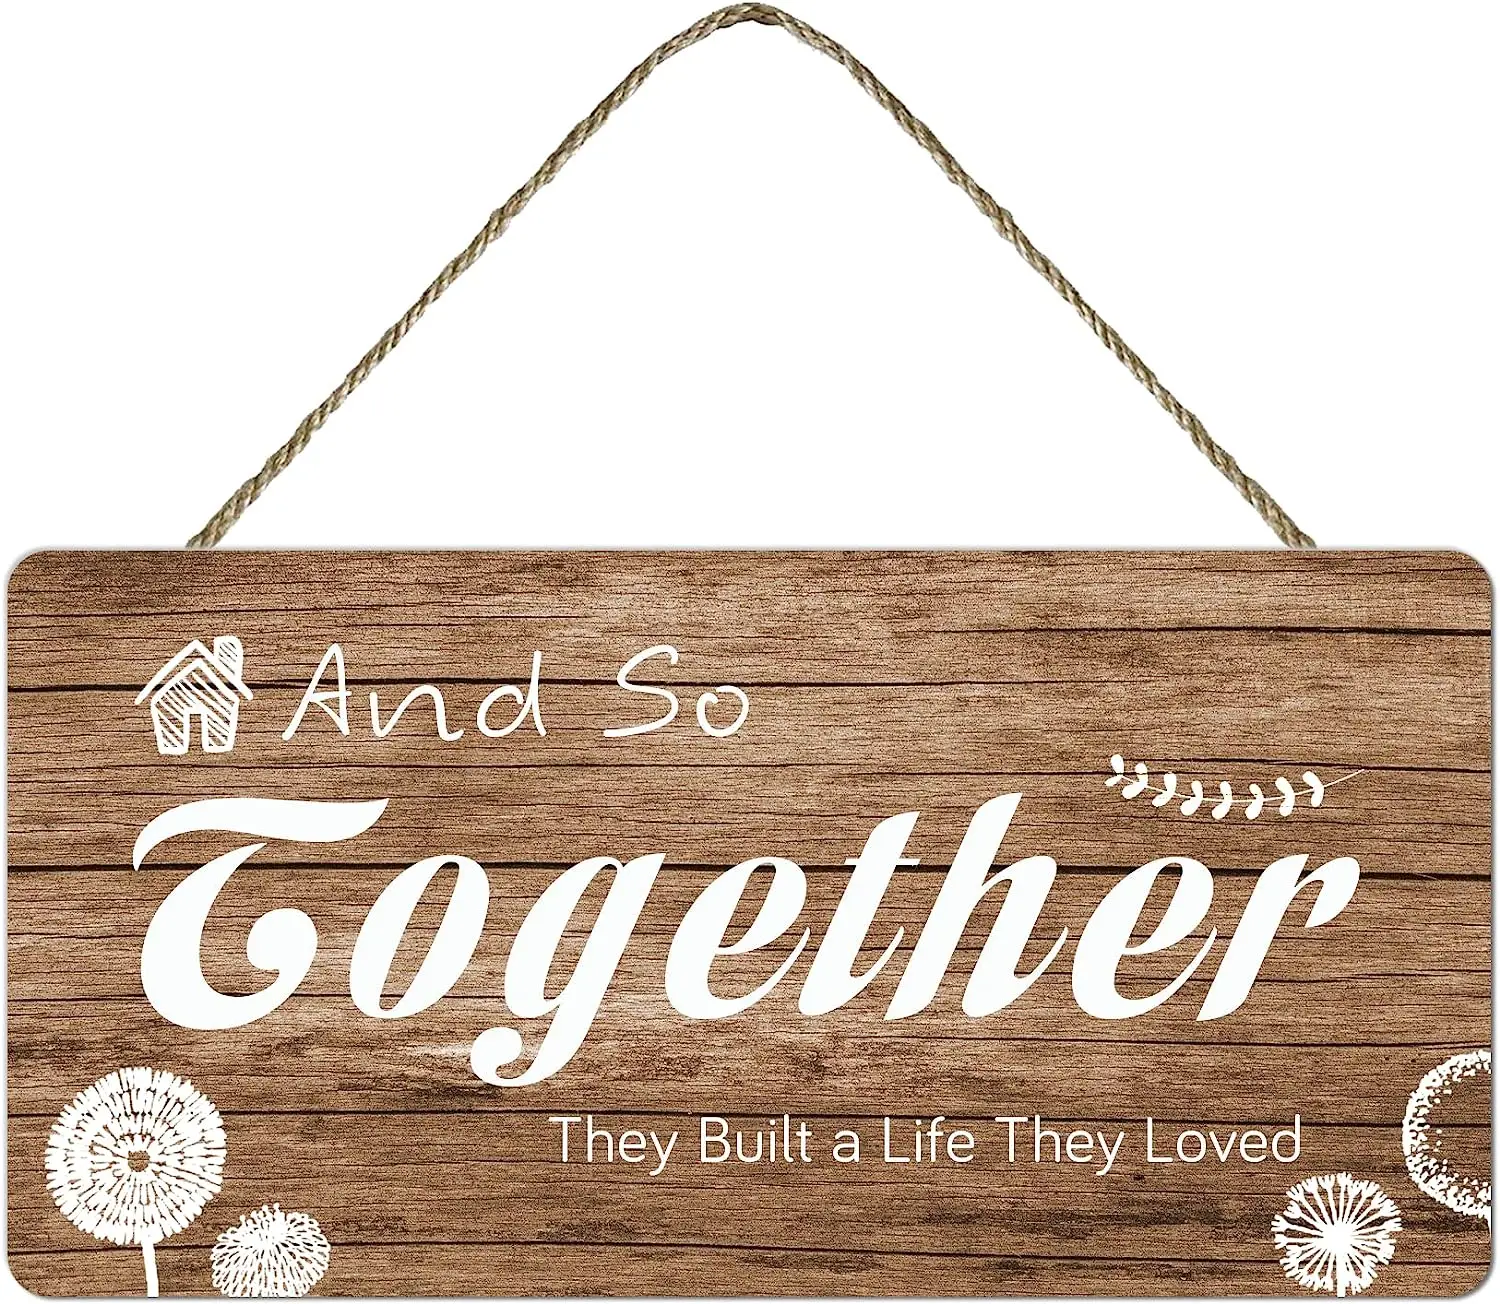 

Funny Wood Sign For Home Decorations And So Together They Built A Life They Loved Plaque For Outdoor Wall Porch Farmhouse Decor